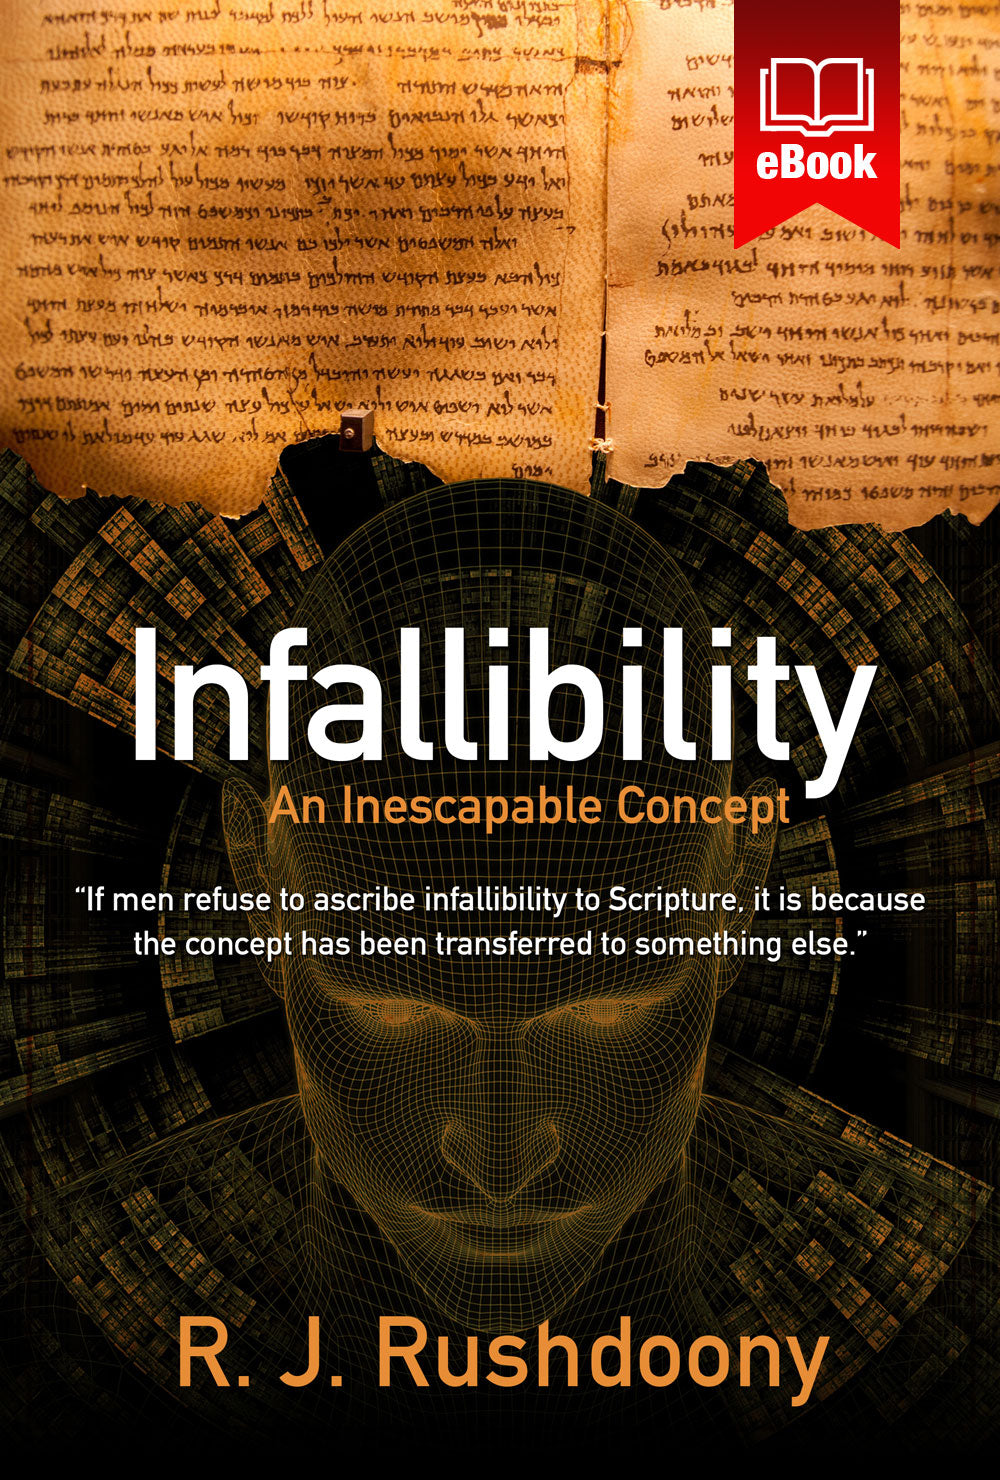 Infallibility: An Inescapable Concept